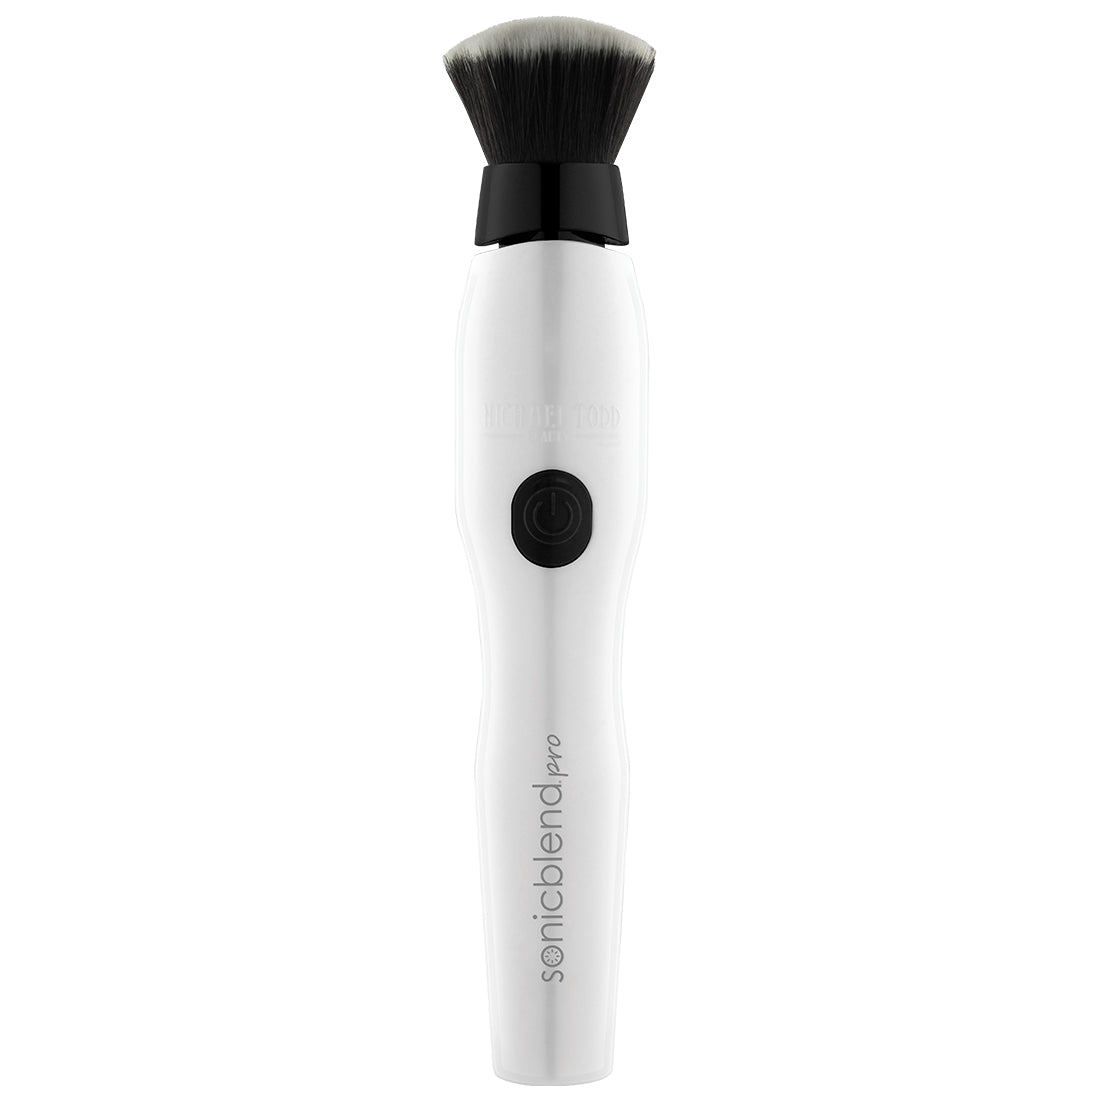 Marble Sonicblend Pro Sonic Makeup Application Brush